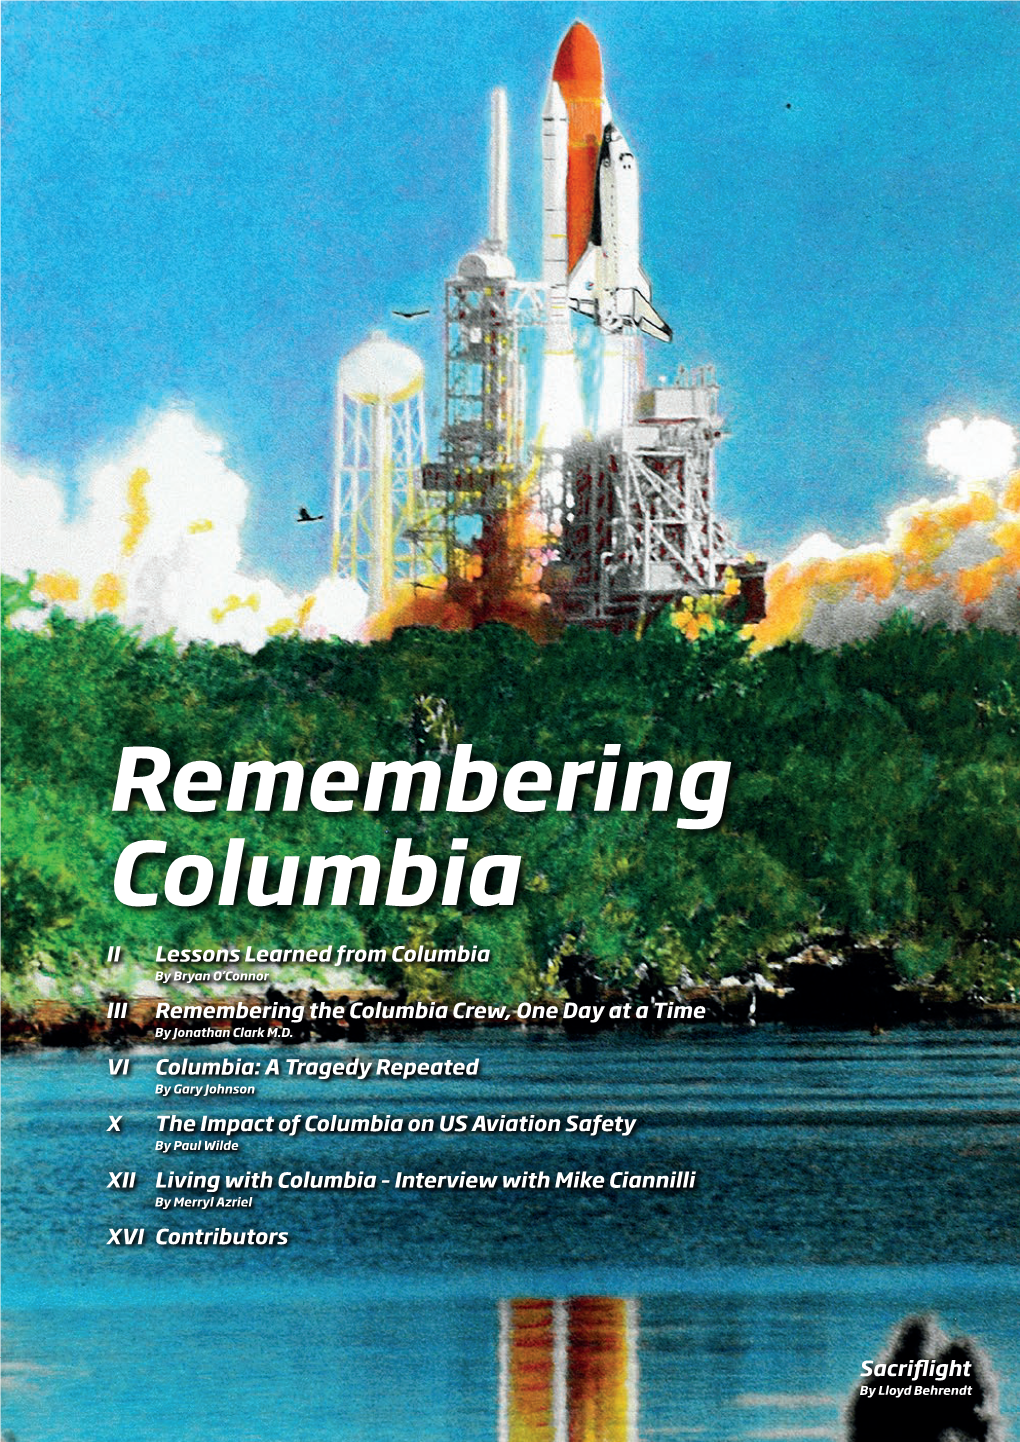 Remembering Columbia II Lessons Learned from Columbia by Bryan O’Connor III Remembering the Columbia Crew, One Day at a Time by Jonathan Clark M.D